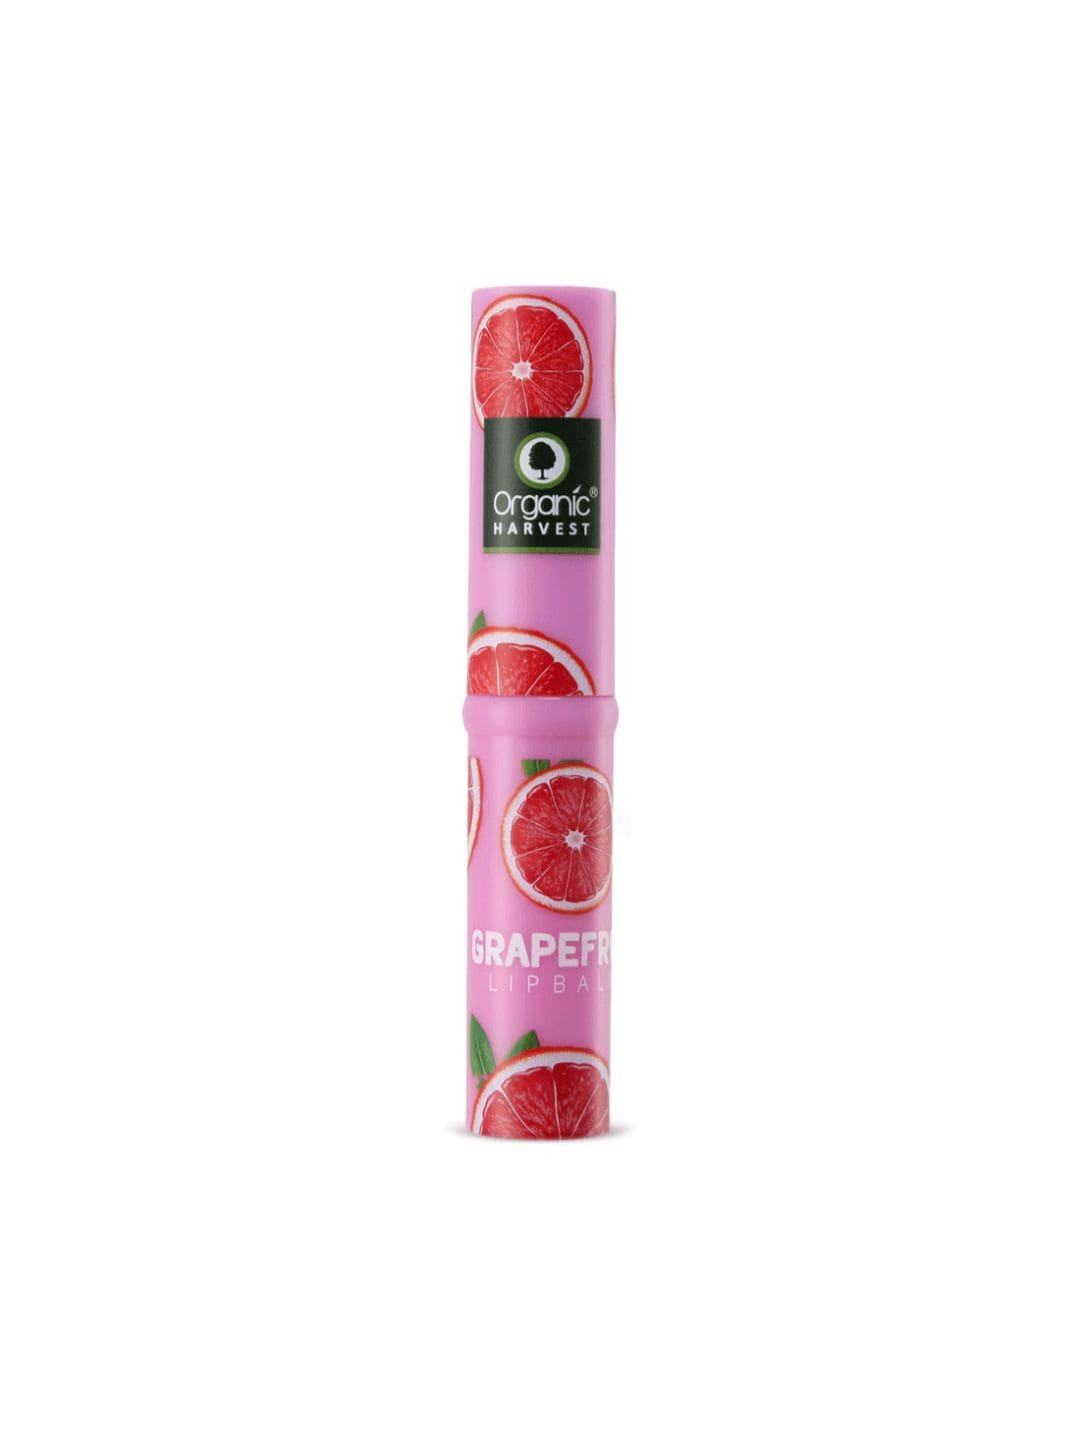 Organic Harvest Grapefruit Lip Balm With Mango Butter 3 g Price in India